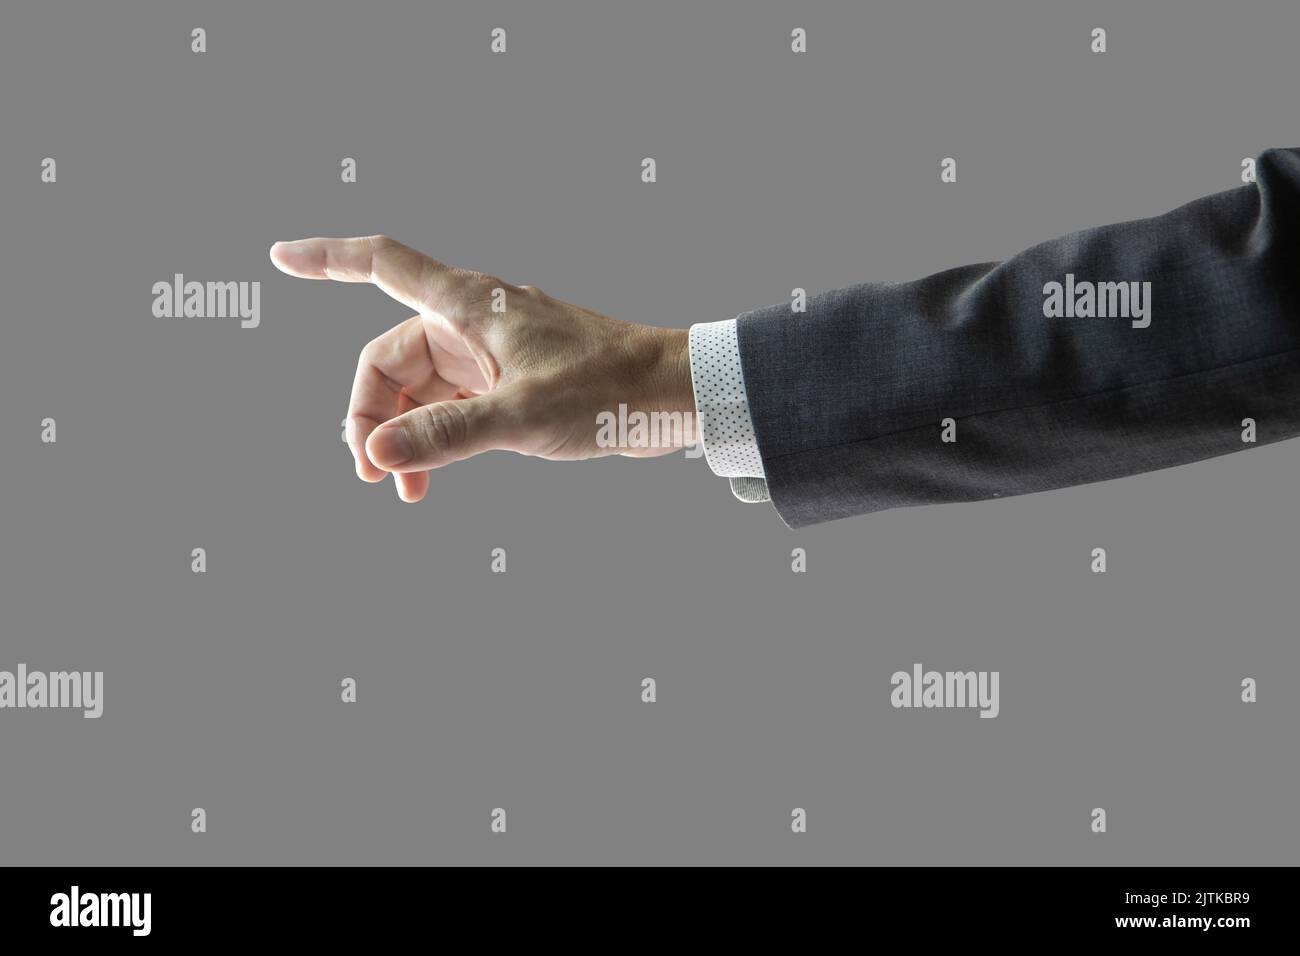 Right hand and forearm of a businessman with gray suit jacket sleeve with white shirt, pointing forward showing touching something gesture. Isolated o Stock Photo